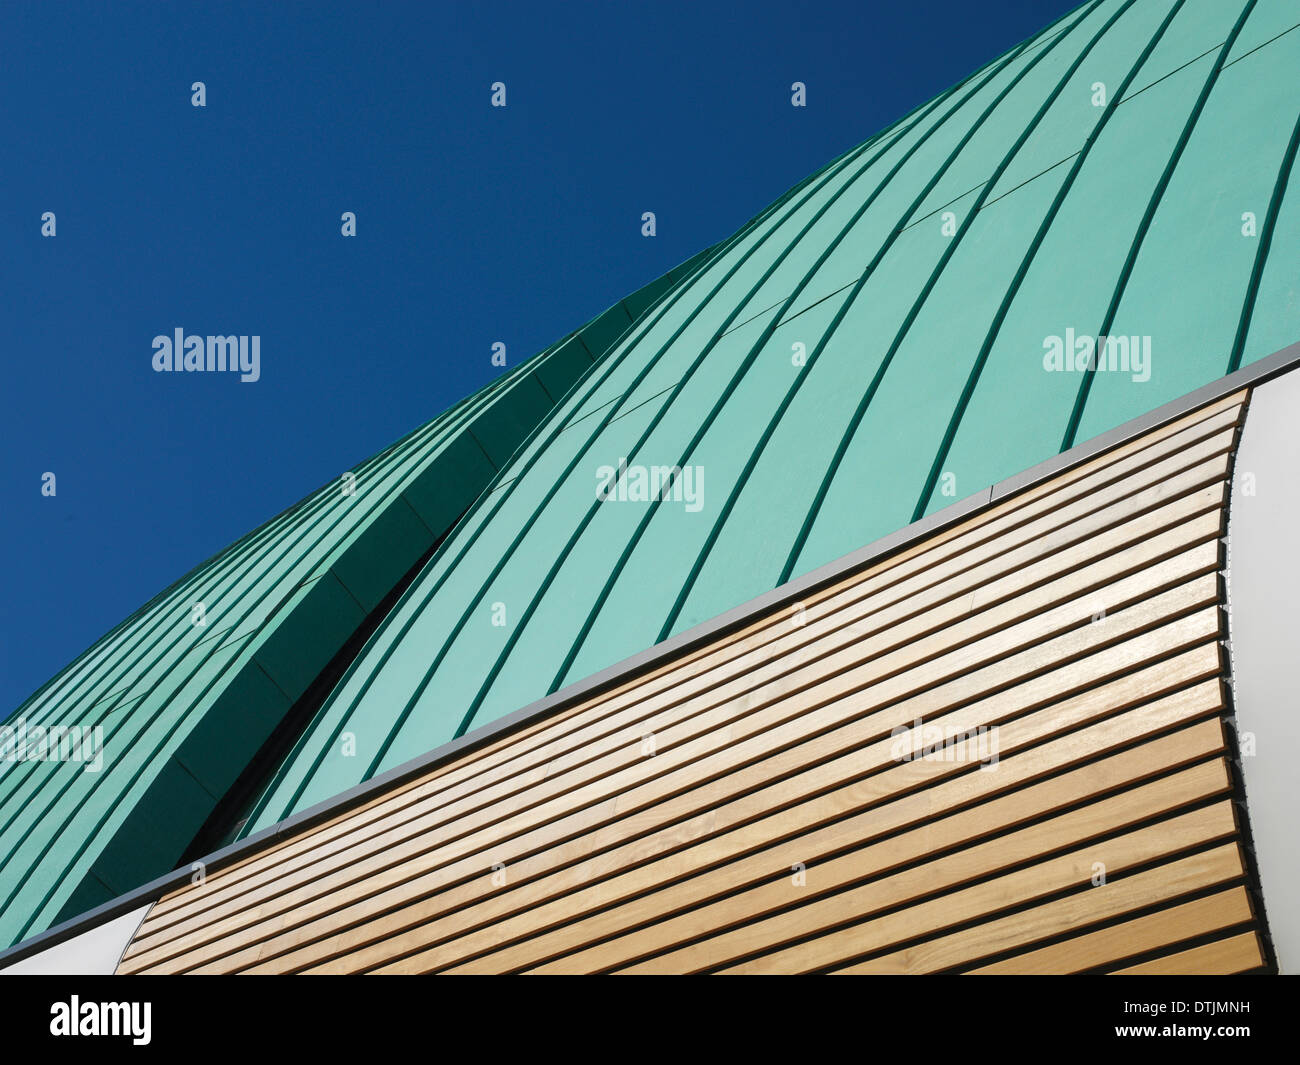 Roof detail of Leisure Centre, Swansea, Wales, UK Stock Photo